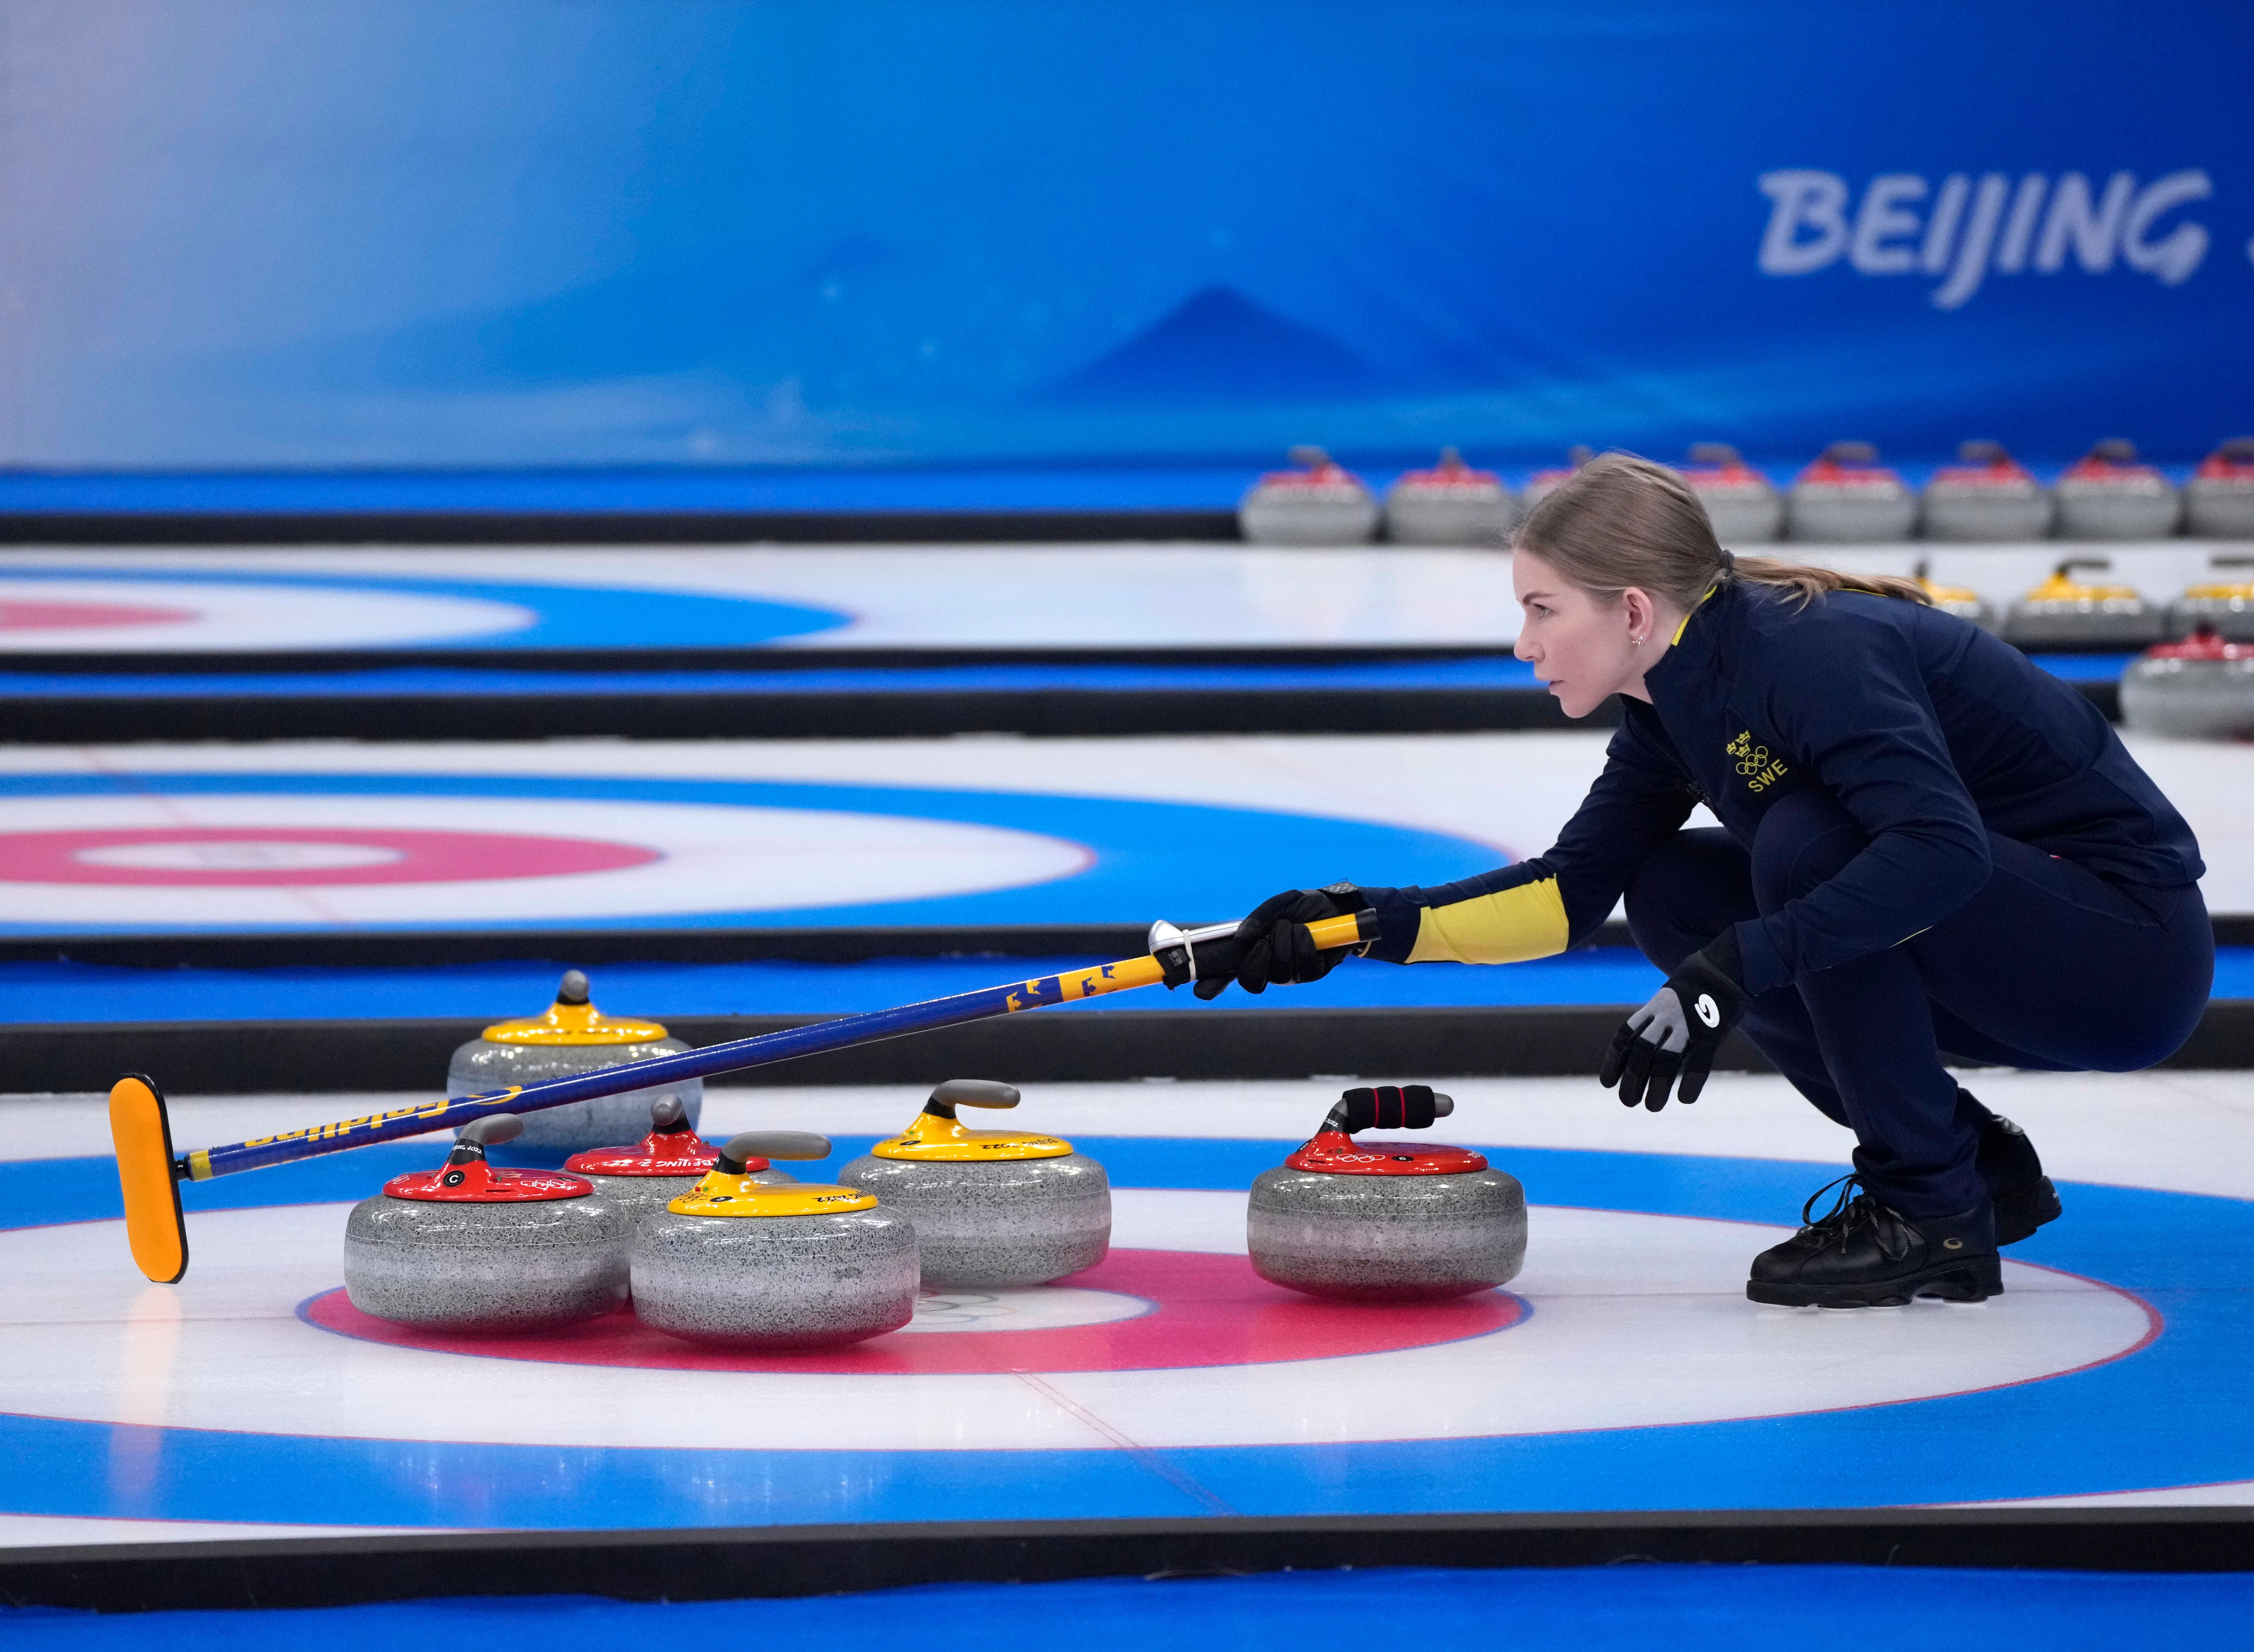 EXPLAINER How does curling scoring work? The Seattle Times